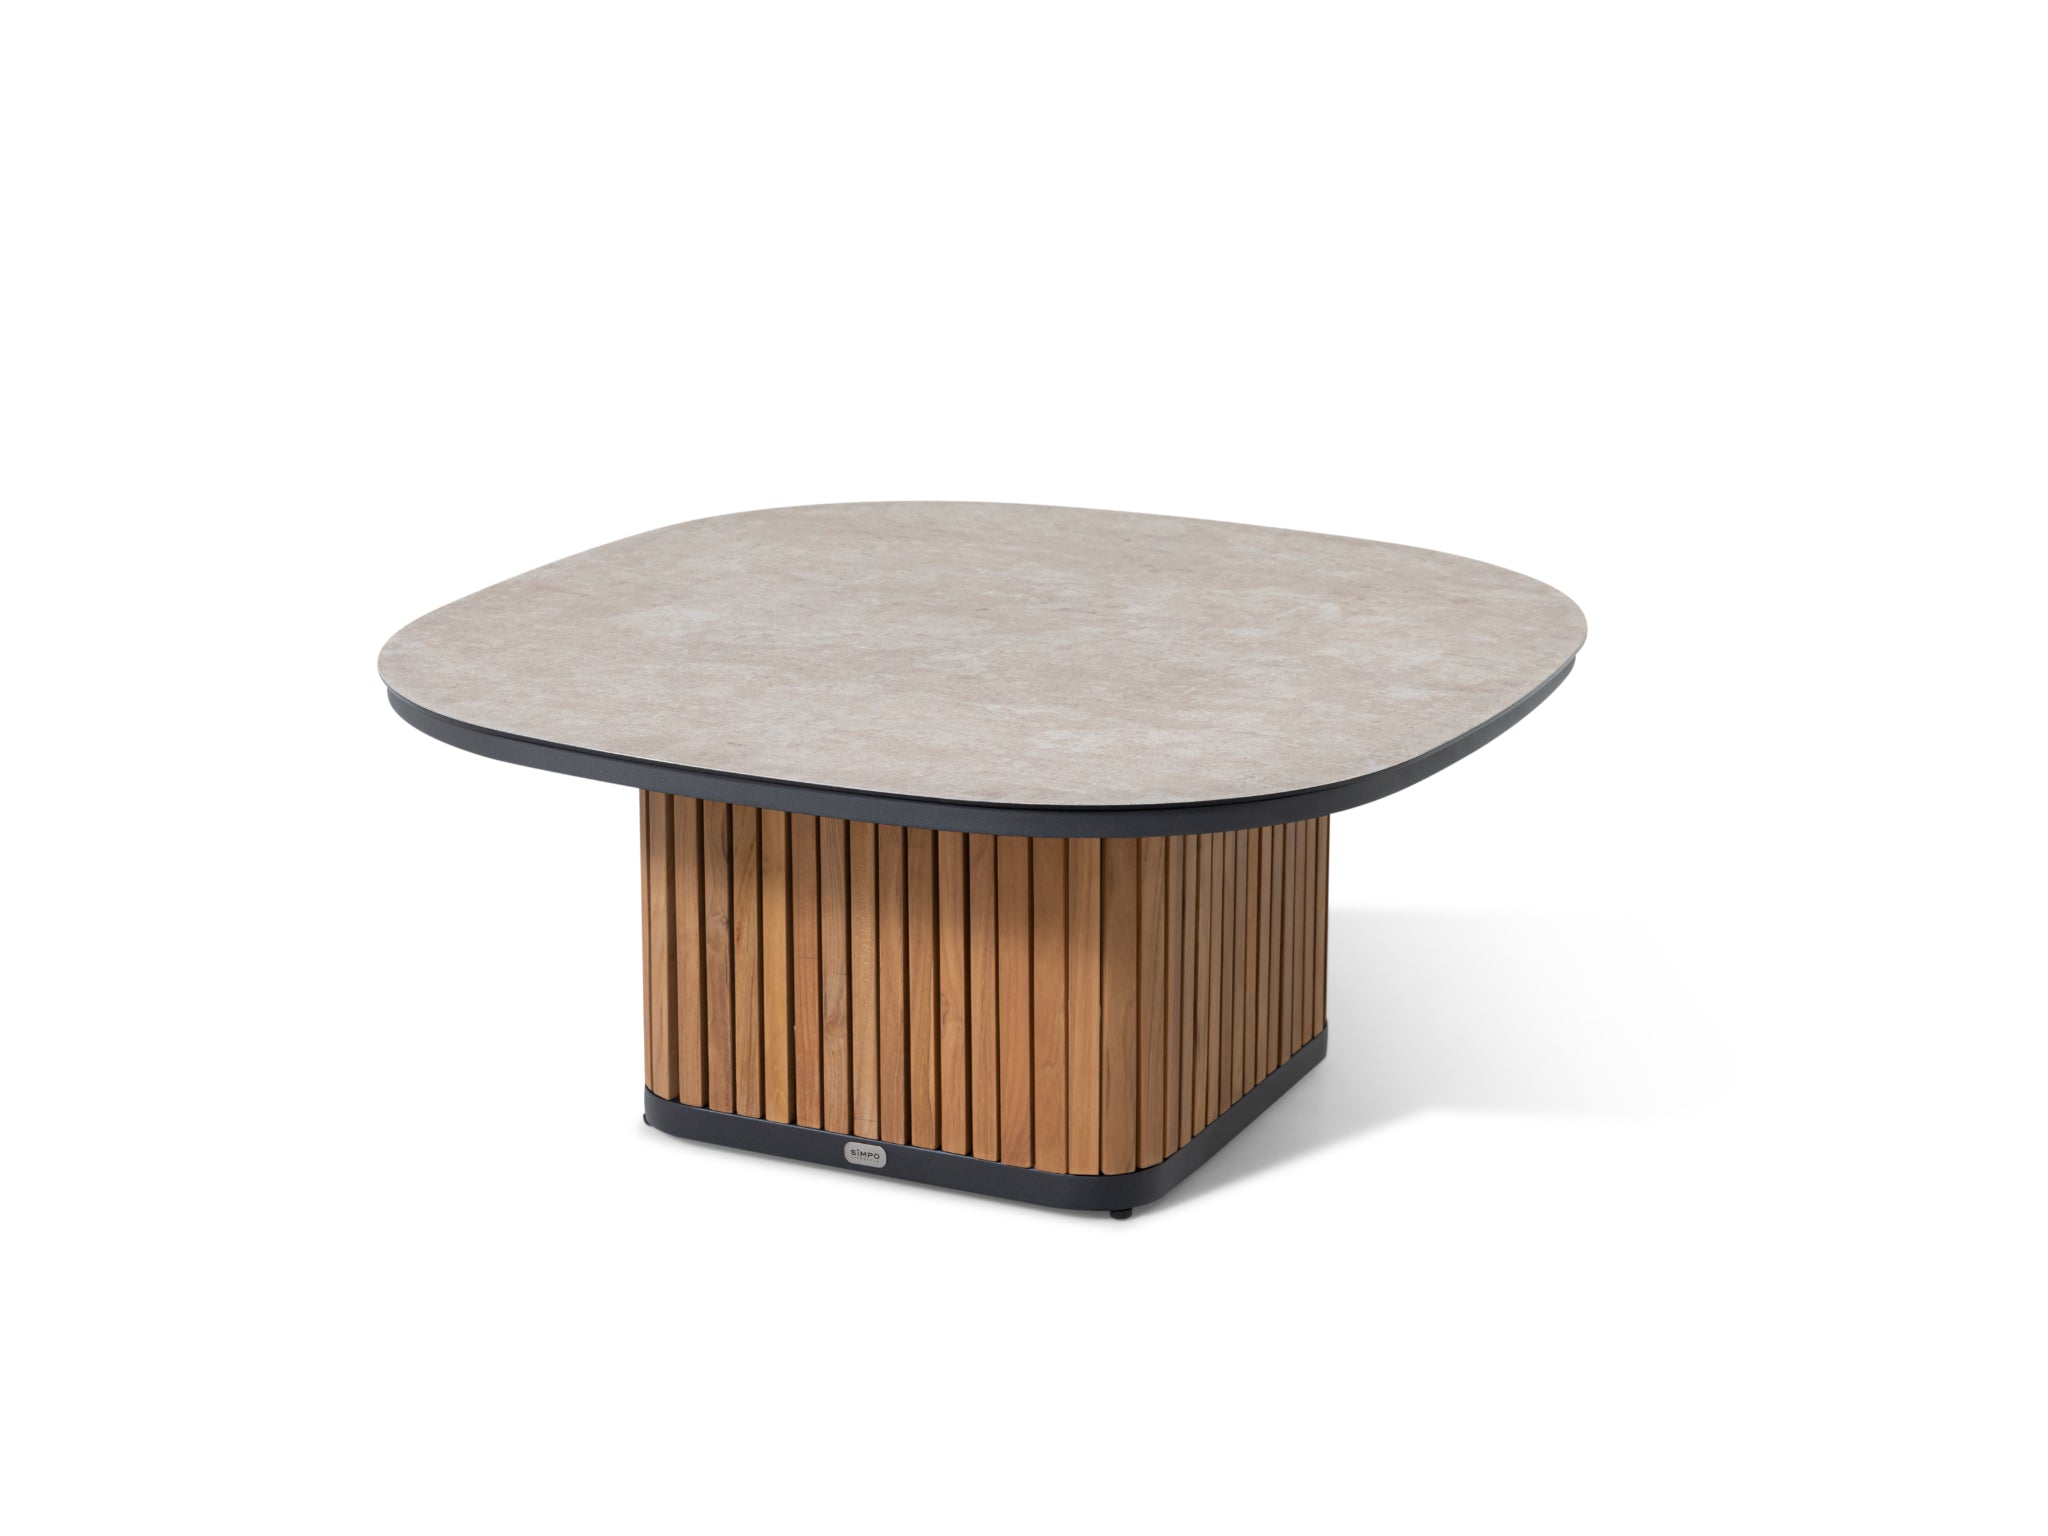 SIMPO by Sunlongarden Yacht Coffee Table